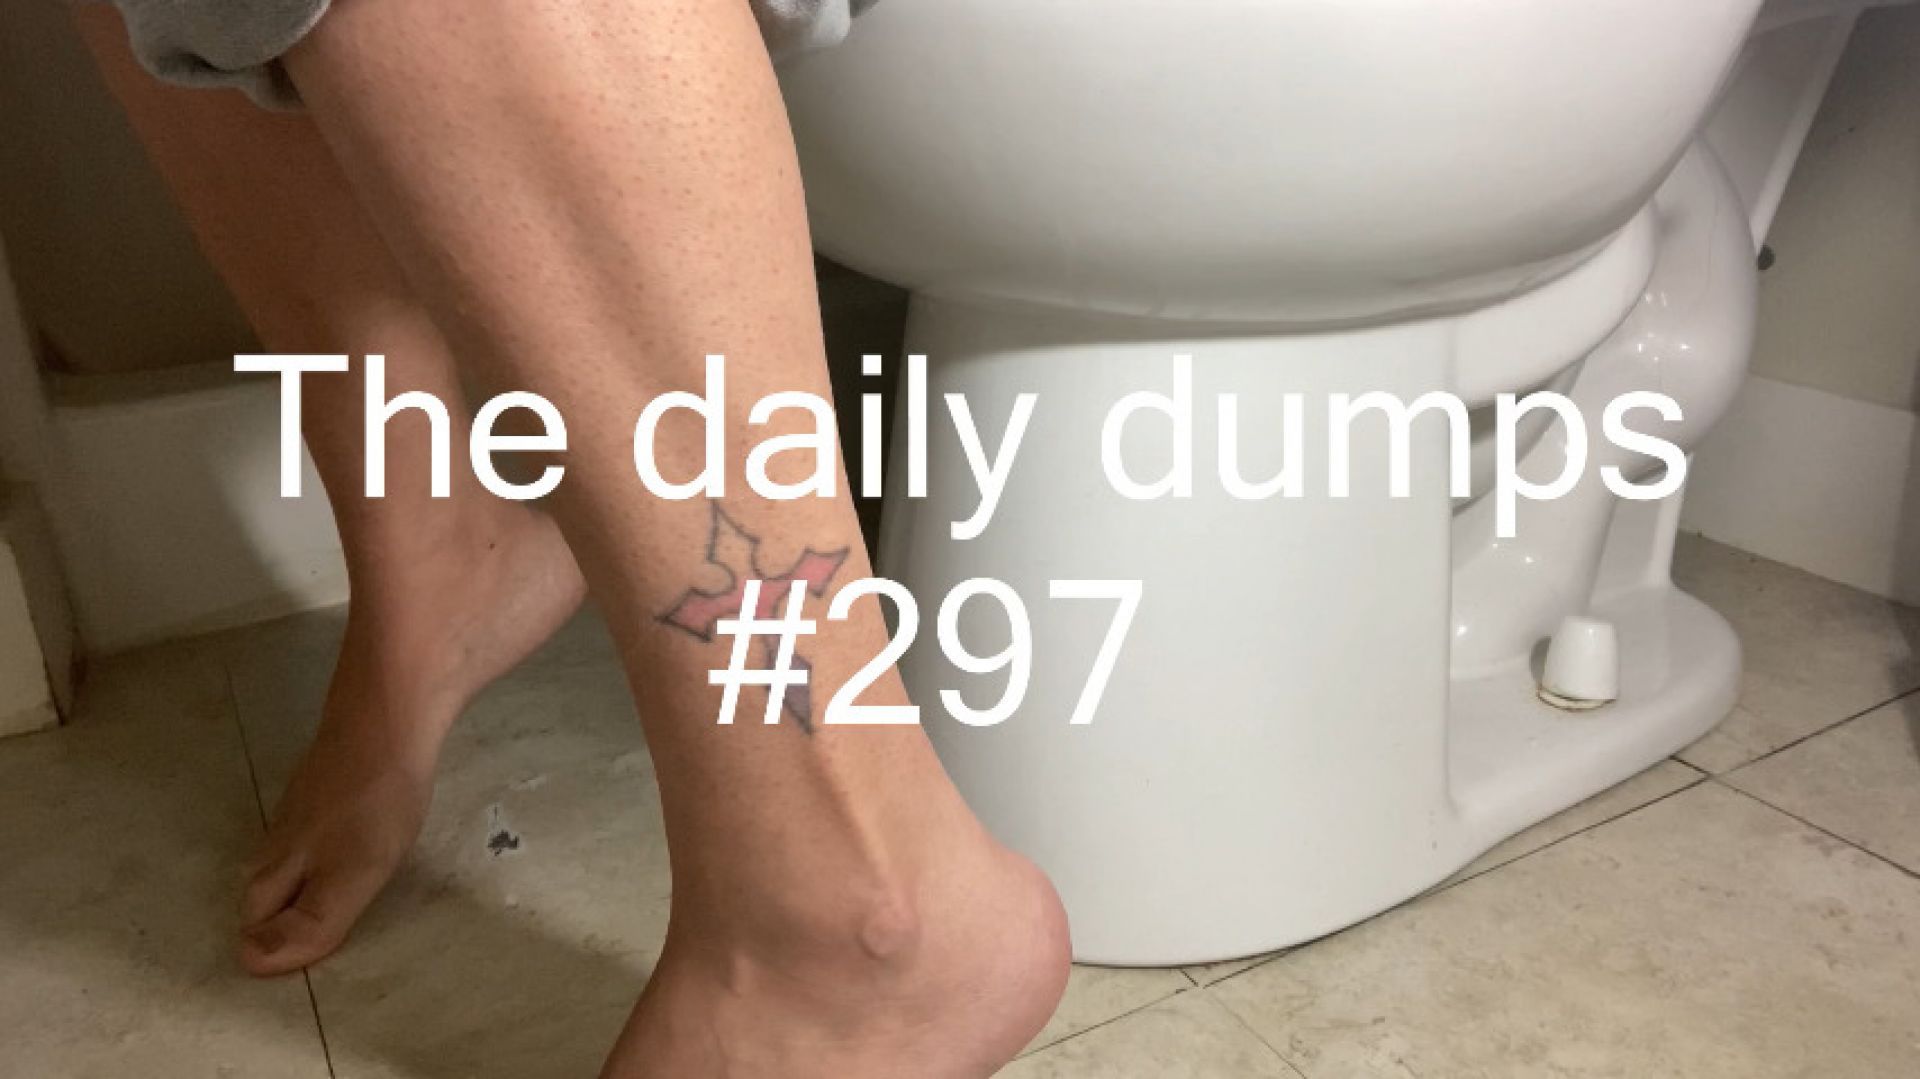 The daily dumps #297